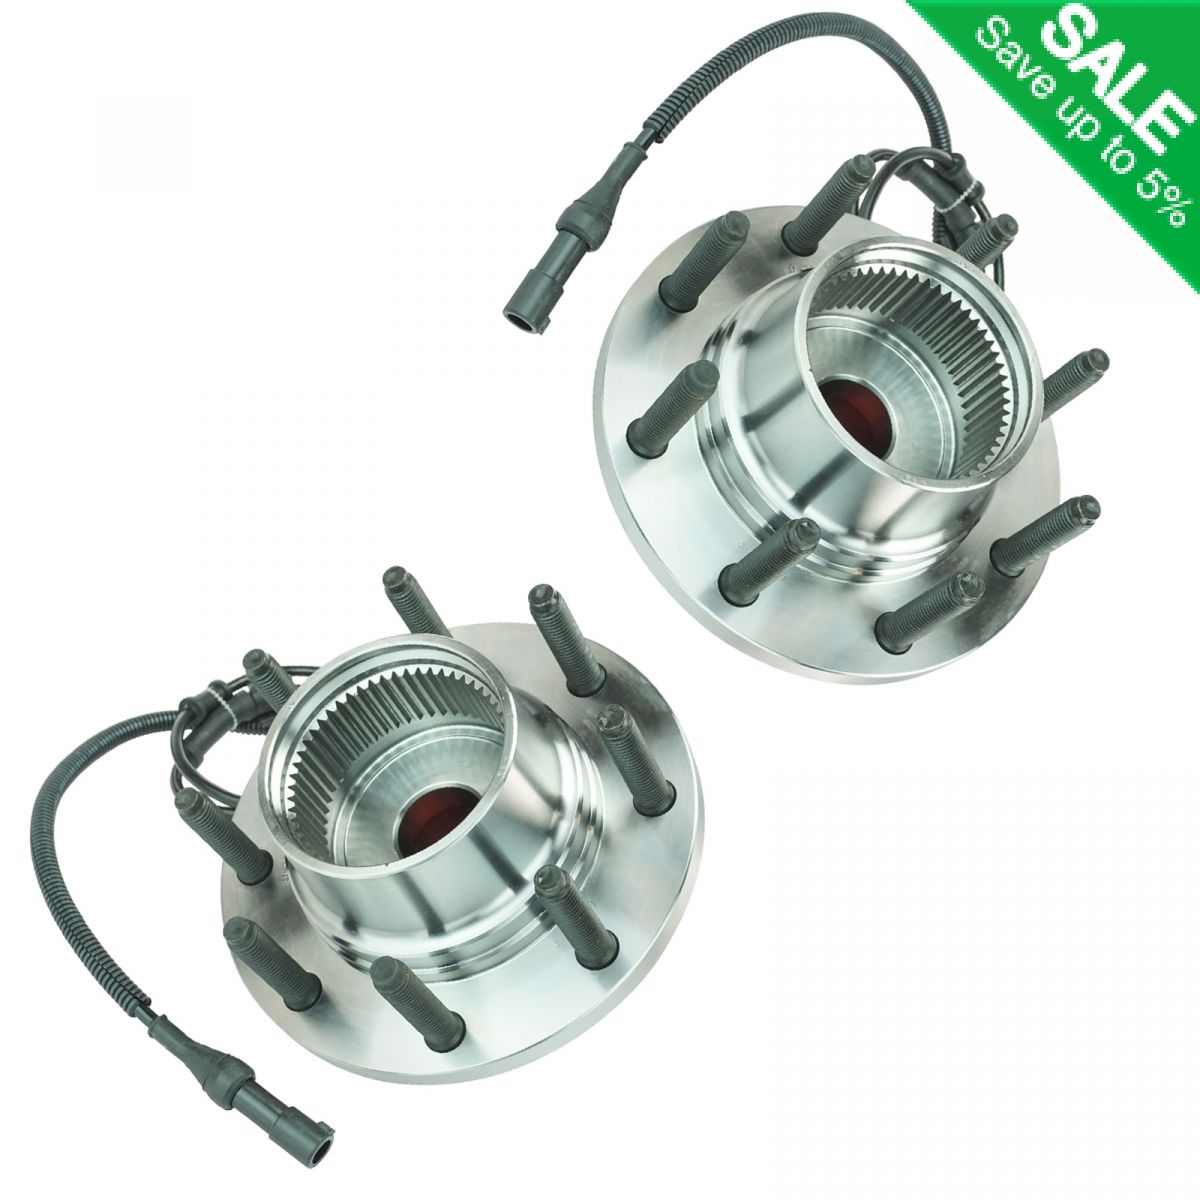 Front Wheel Hub /& Bearing Pair Set 513124 TIMKEN for Chevy Pickup Truck 4x4 4WD